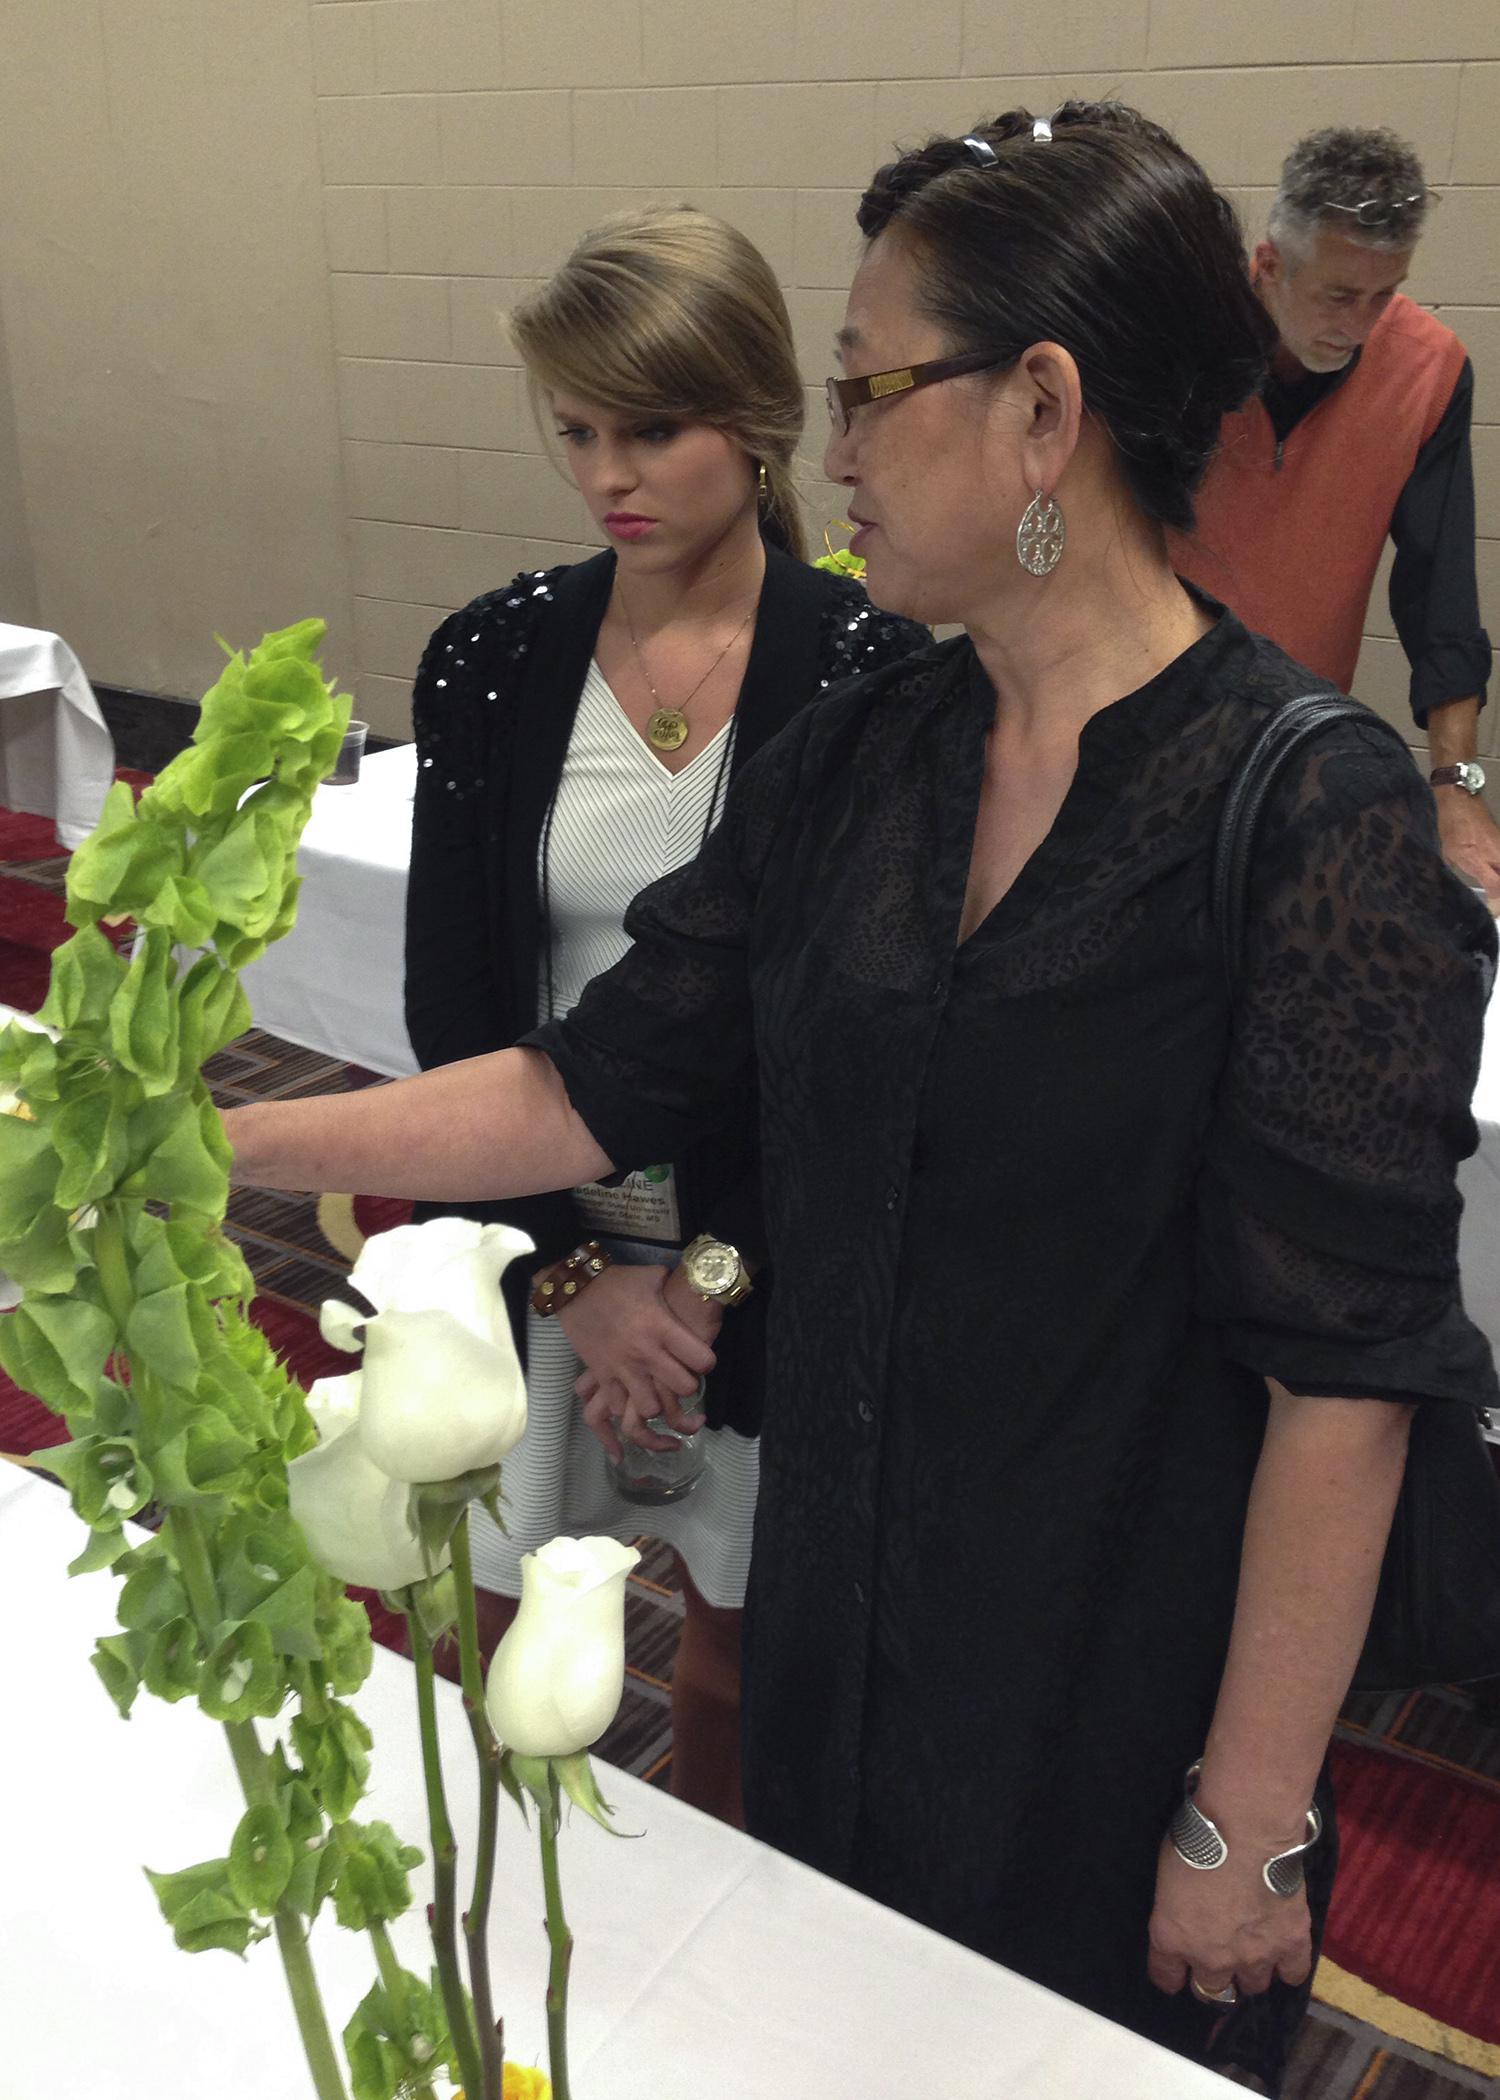 Mississippi State University student Madeline Hawes of Sikeston, Missouri, receives a design critique at July's American Institute of Floral Designers symposium in Chicago from Hitomi Gilliam, an internationally renowned floral artist. (Photo by MSU Plant and Soil Sciences/Jim DelPrince)